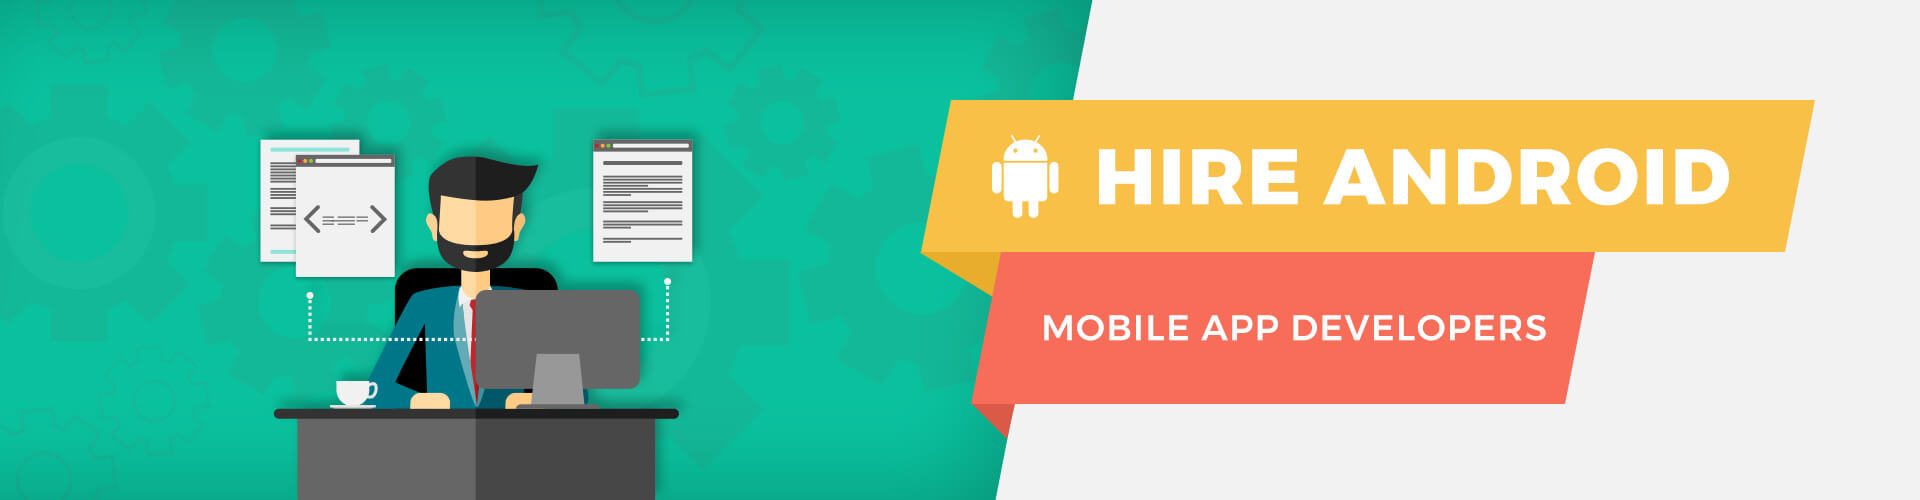 hire android Mobile Application Developer